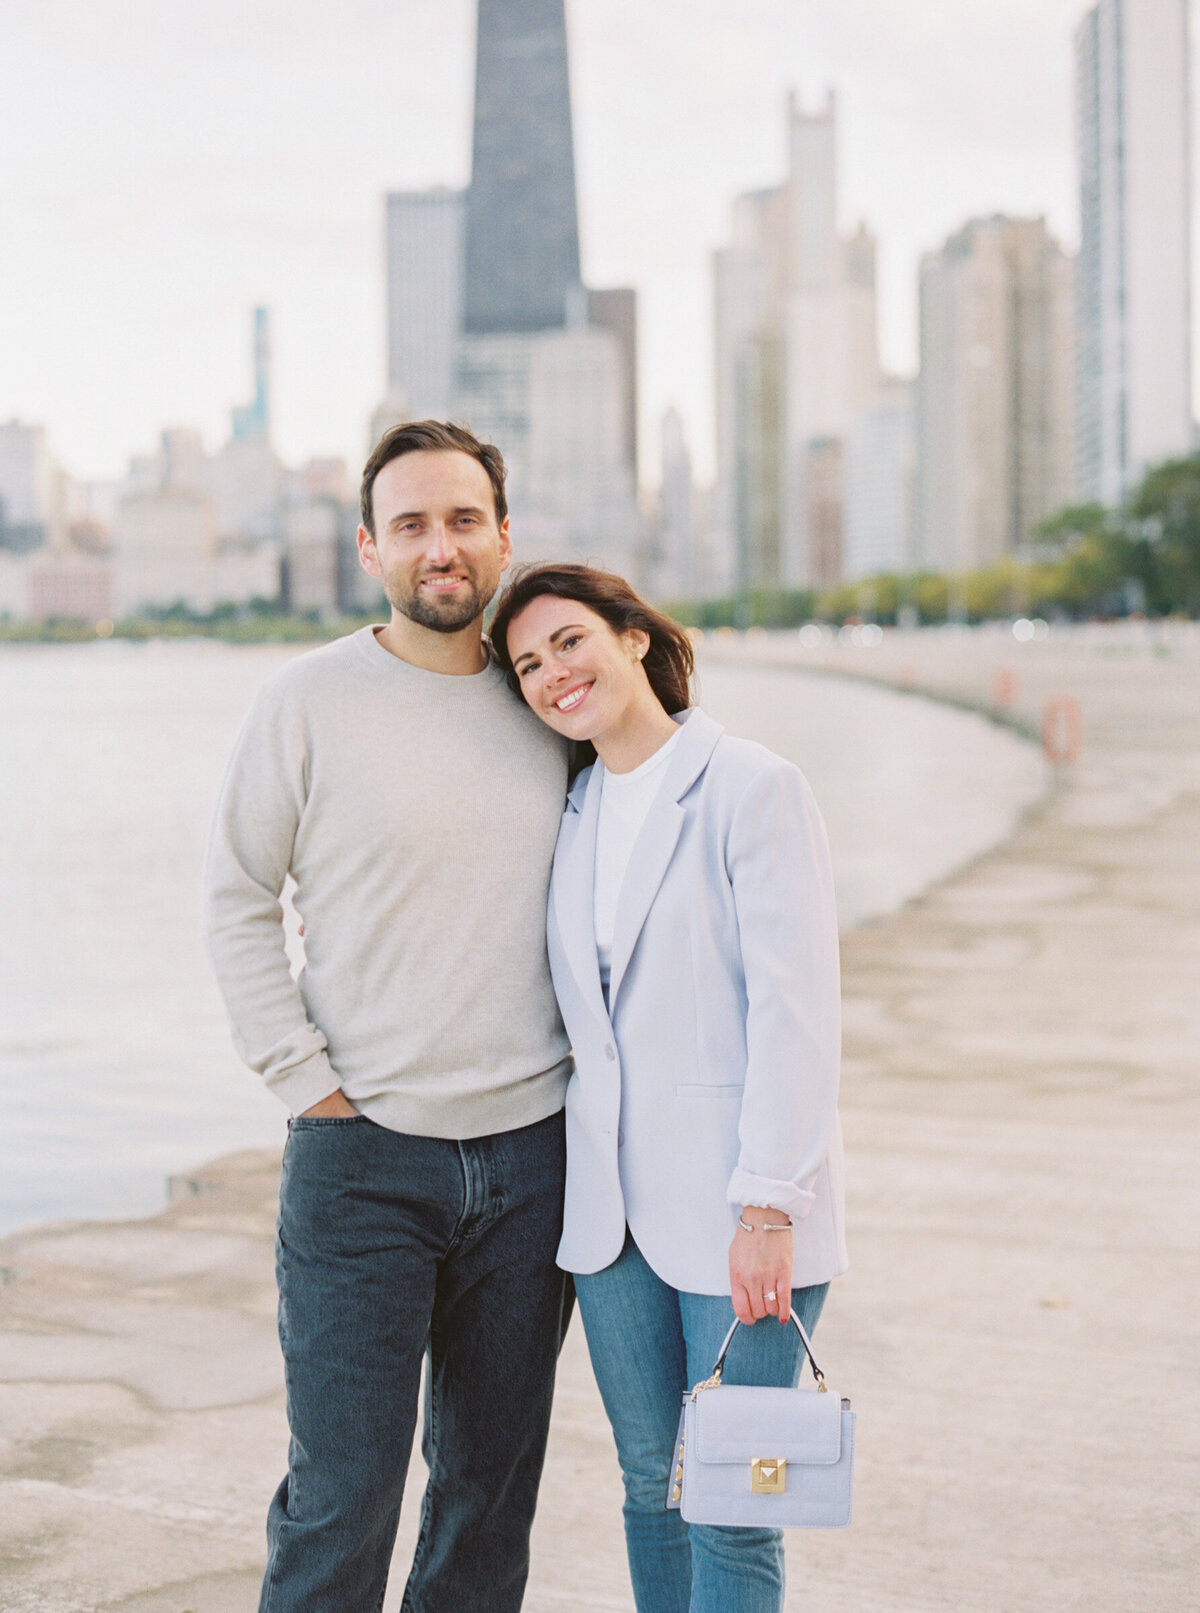 Lincoln Park Chicago Fall Engagement Session Highlights | Amarachi Ikeji Photography 21